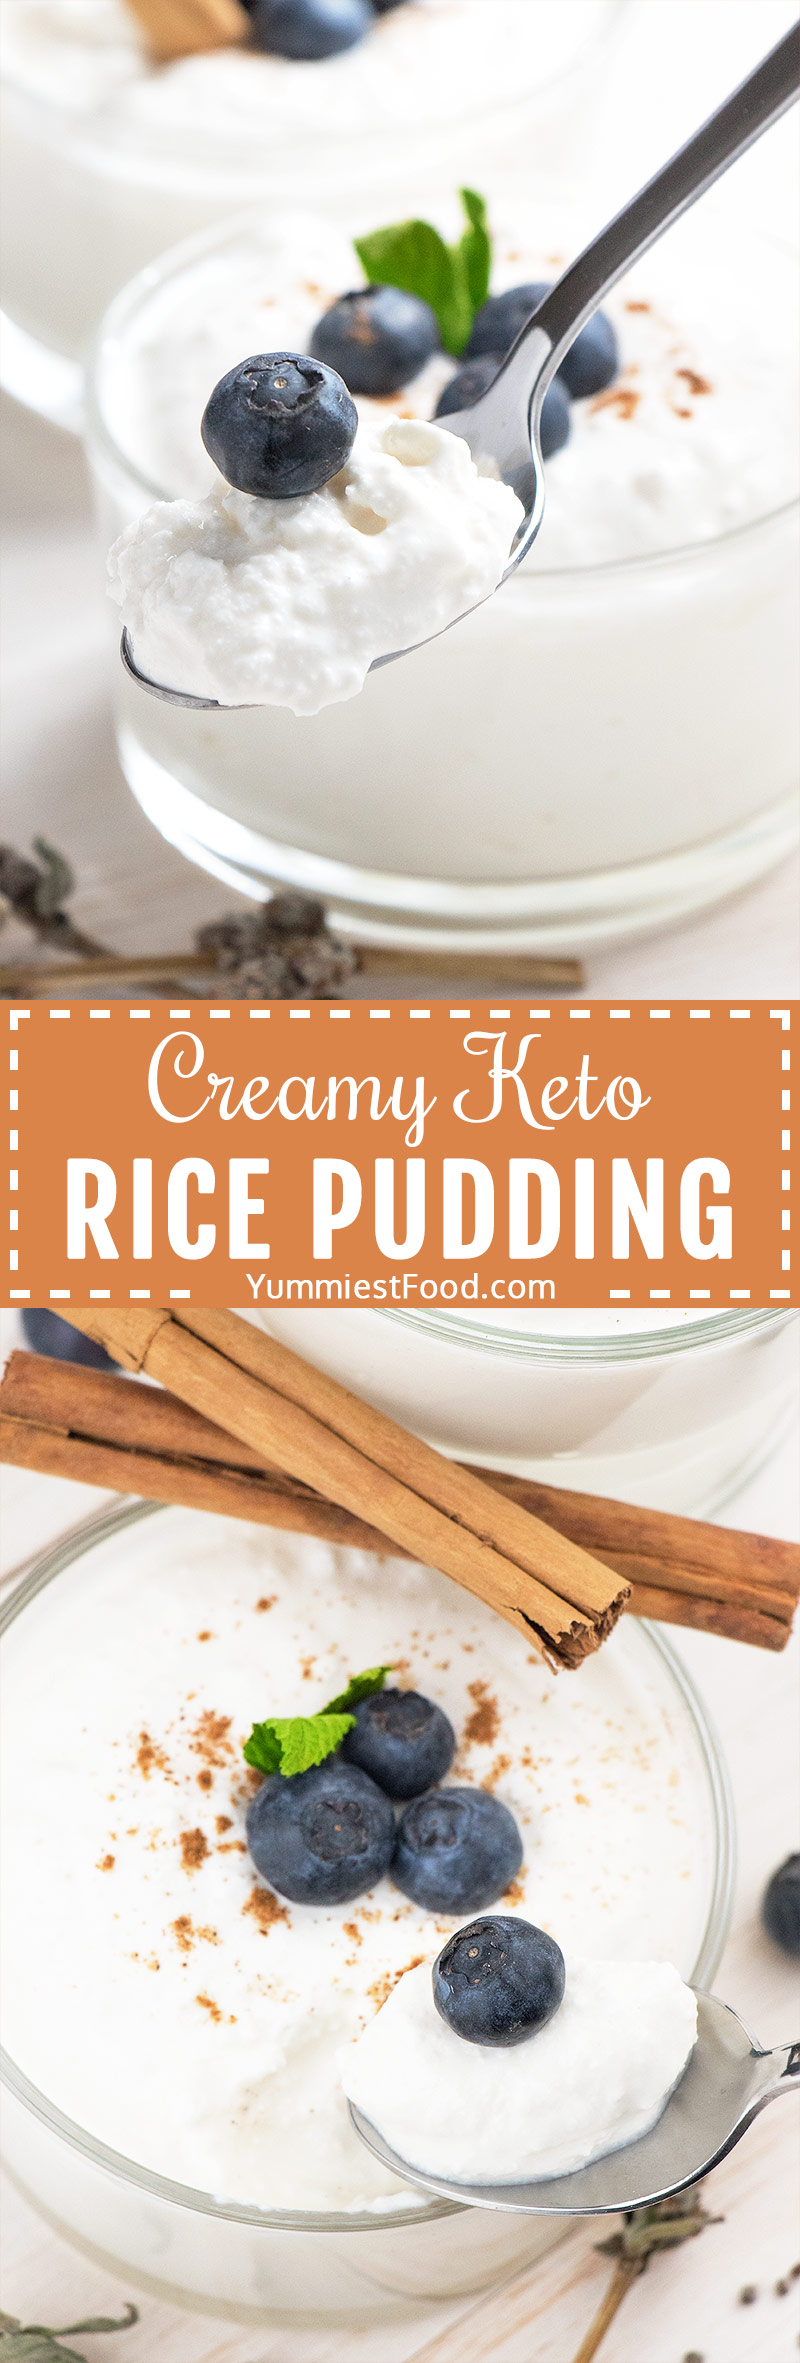 Creamy Keto Rice Pudding recipe - Easy, healthy breakfast or dessert for the ketogenic diet